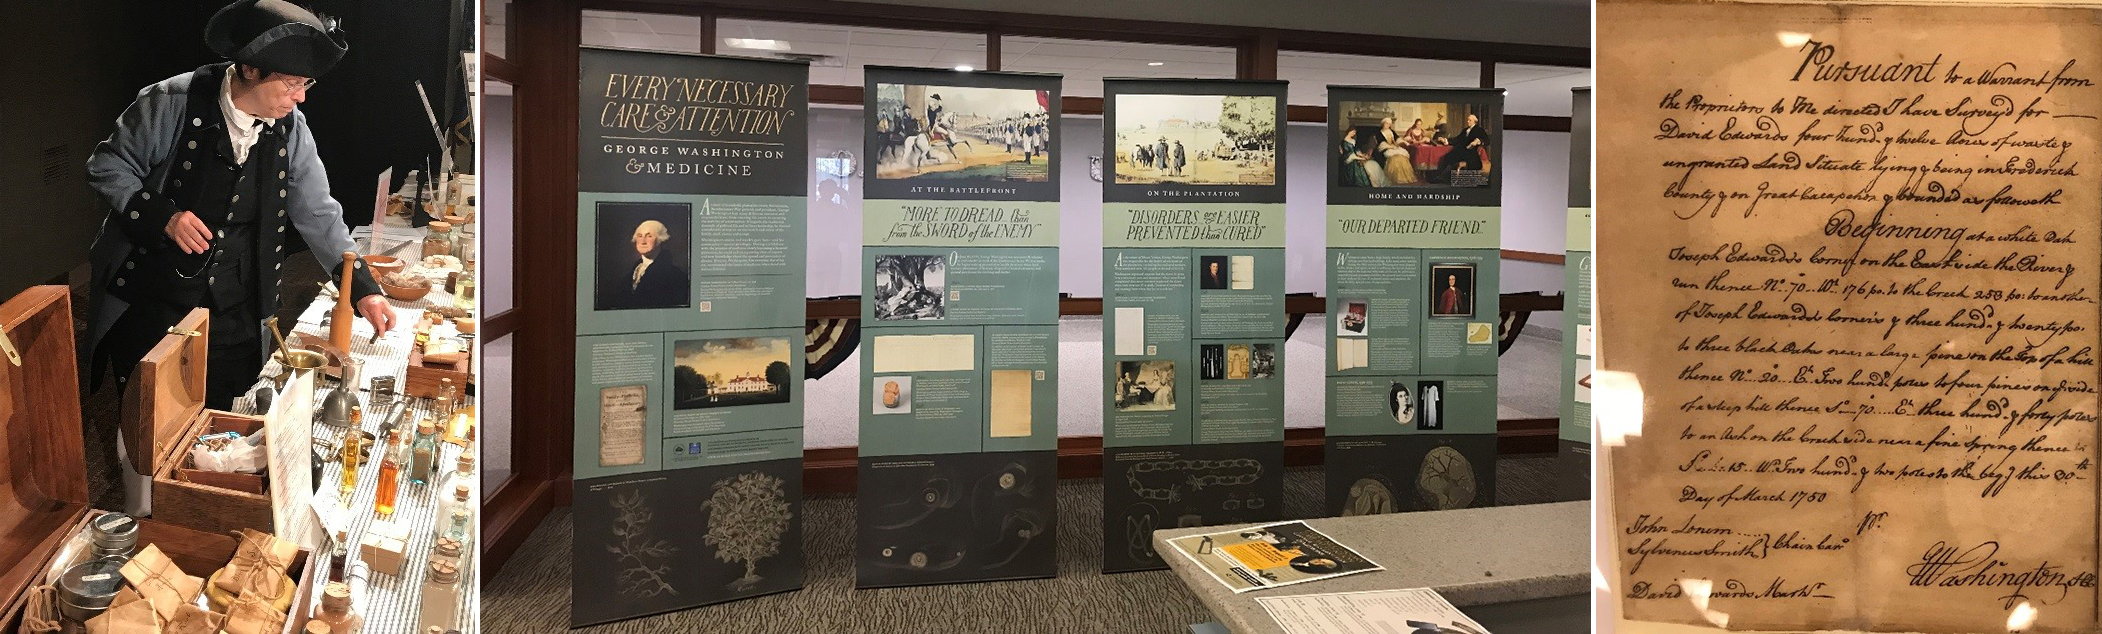 three photos: Revolutionary War surgeon re-enacter, exhibit banners, and a document from George Washington